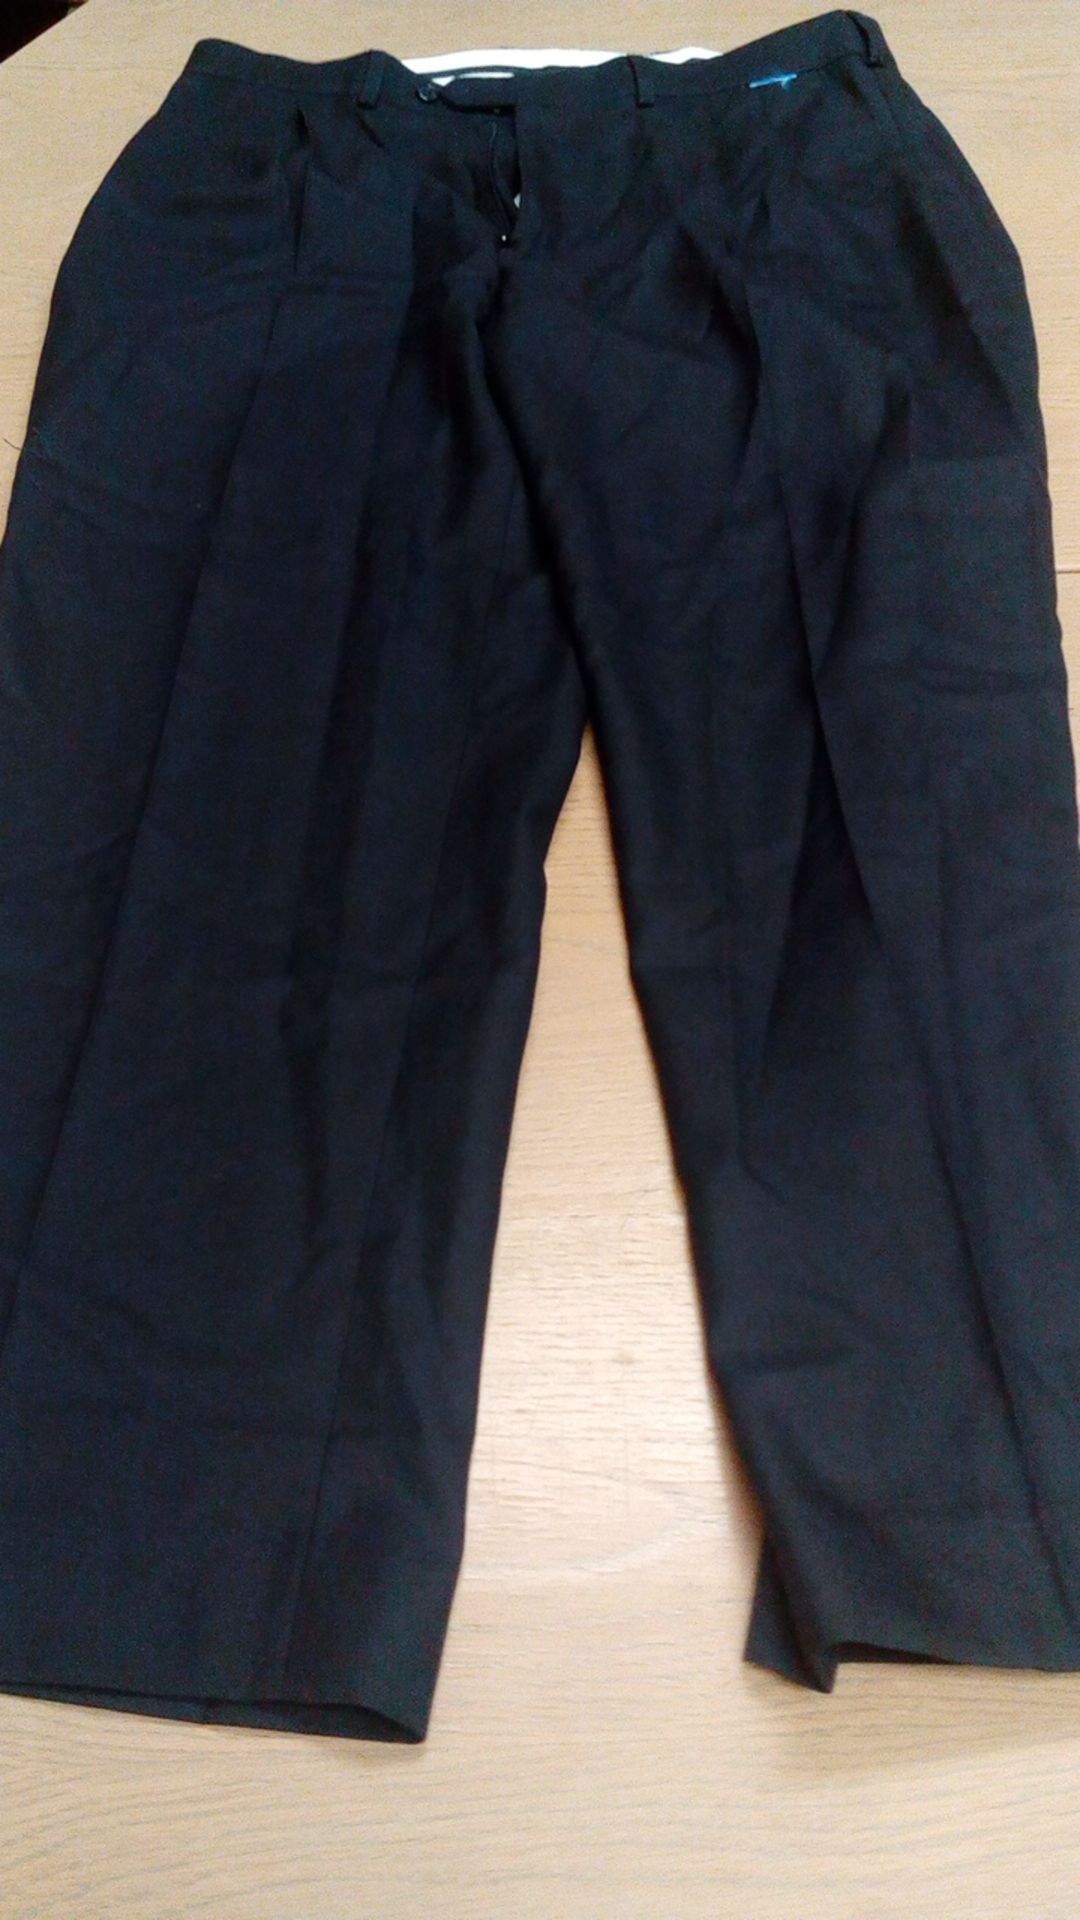 Alexandra workwear size 36 inch mens navy work trousers Alexandra workwear new and unused, these